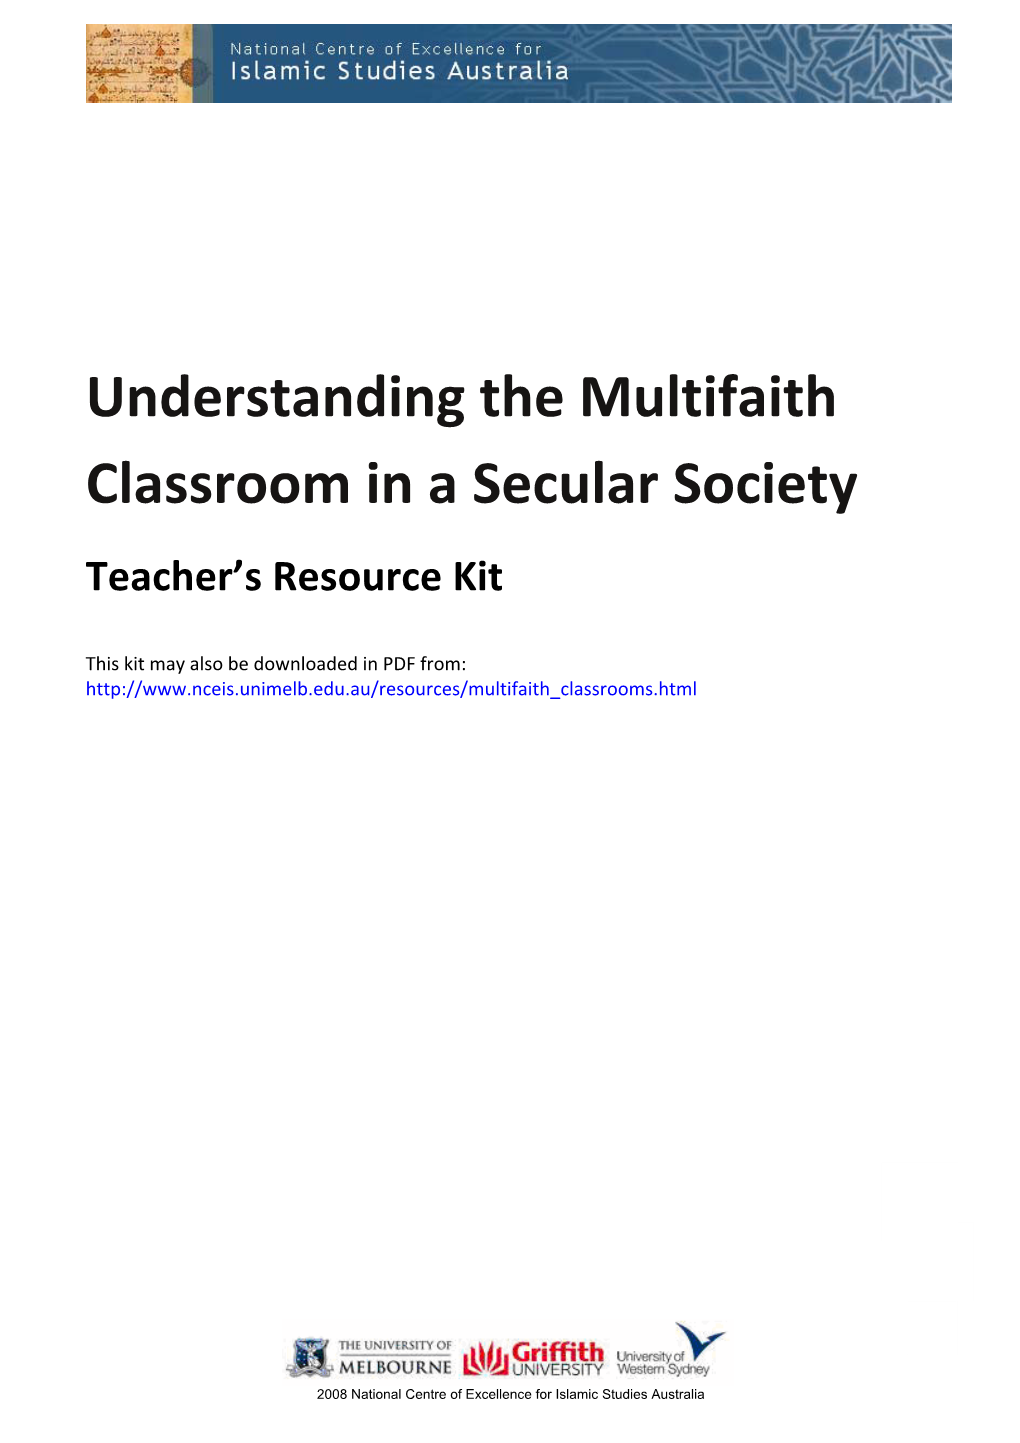 Understanding the Multifaith Classroom in a Secular Society Teacher’S Resource Kit